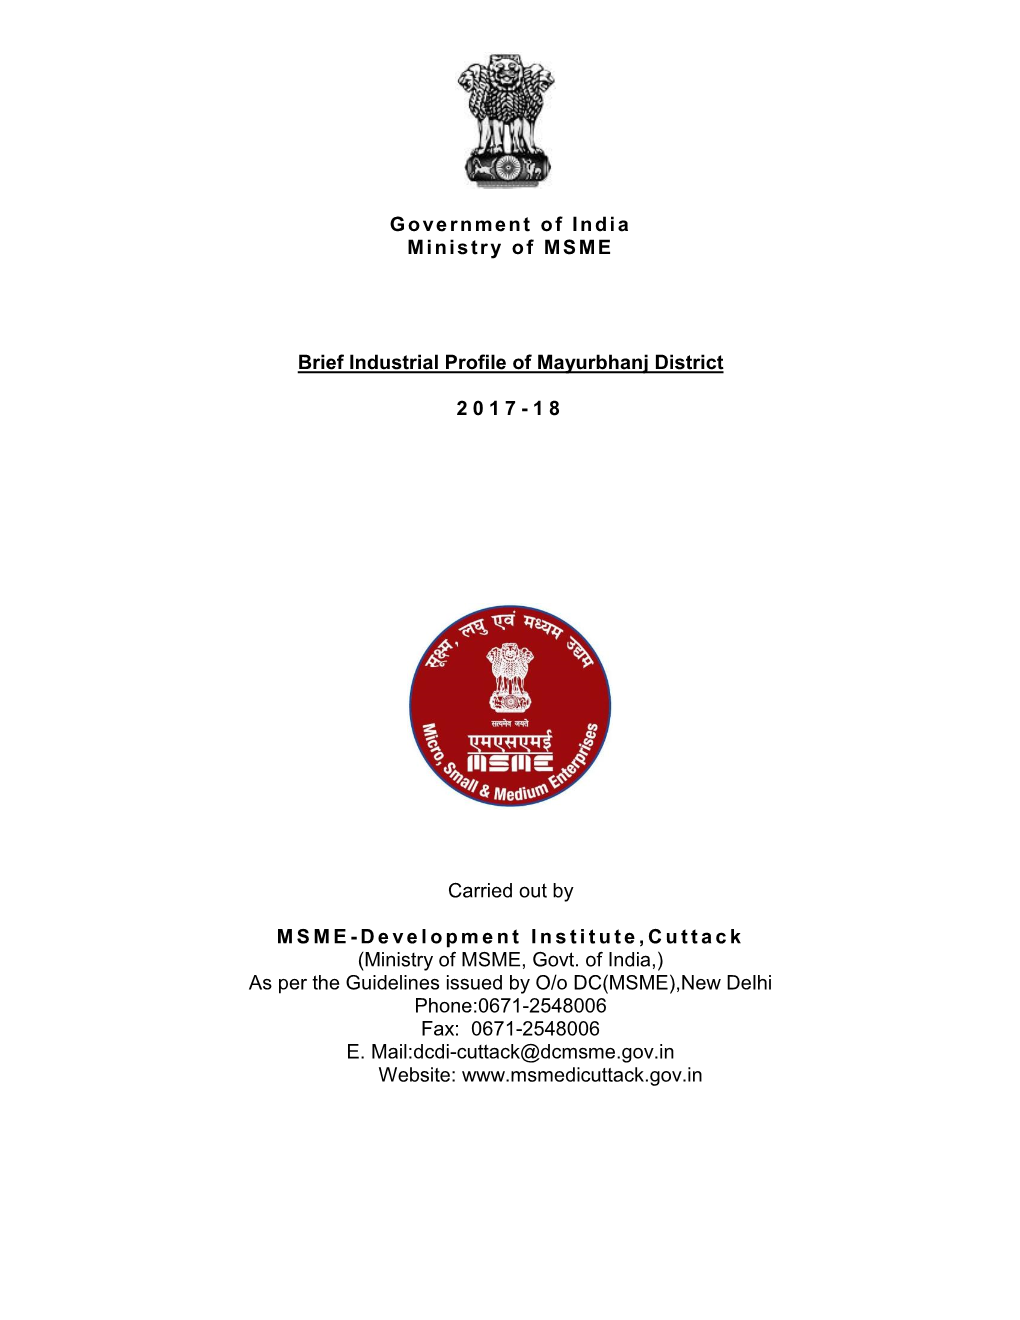 Government of India Ministry of MSME Brief Industrial Profile of Mayurbhanj District 2017-18 Carried out by MSME-Development